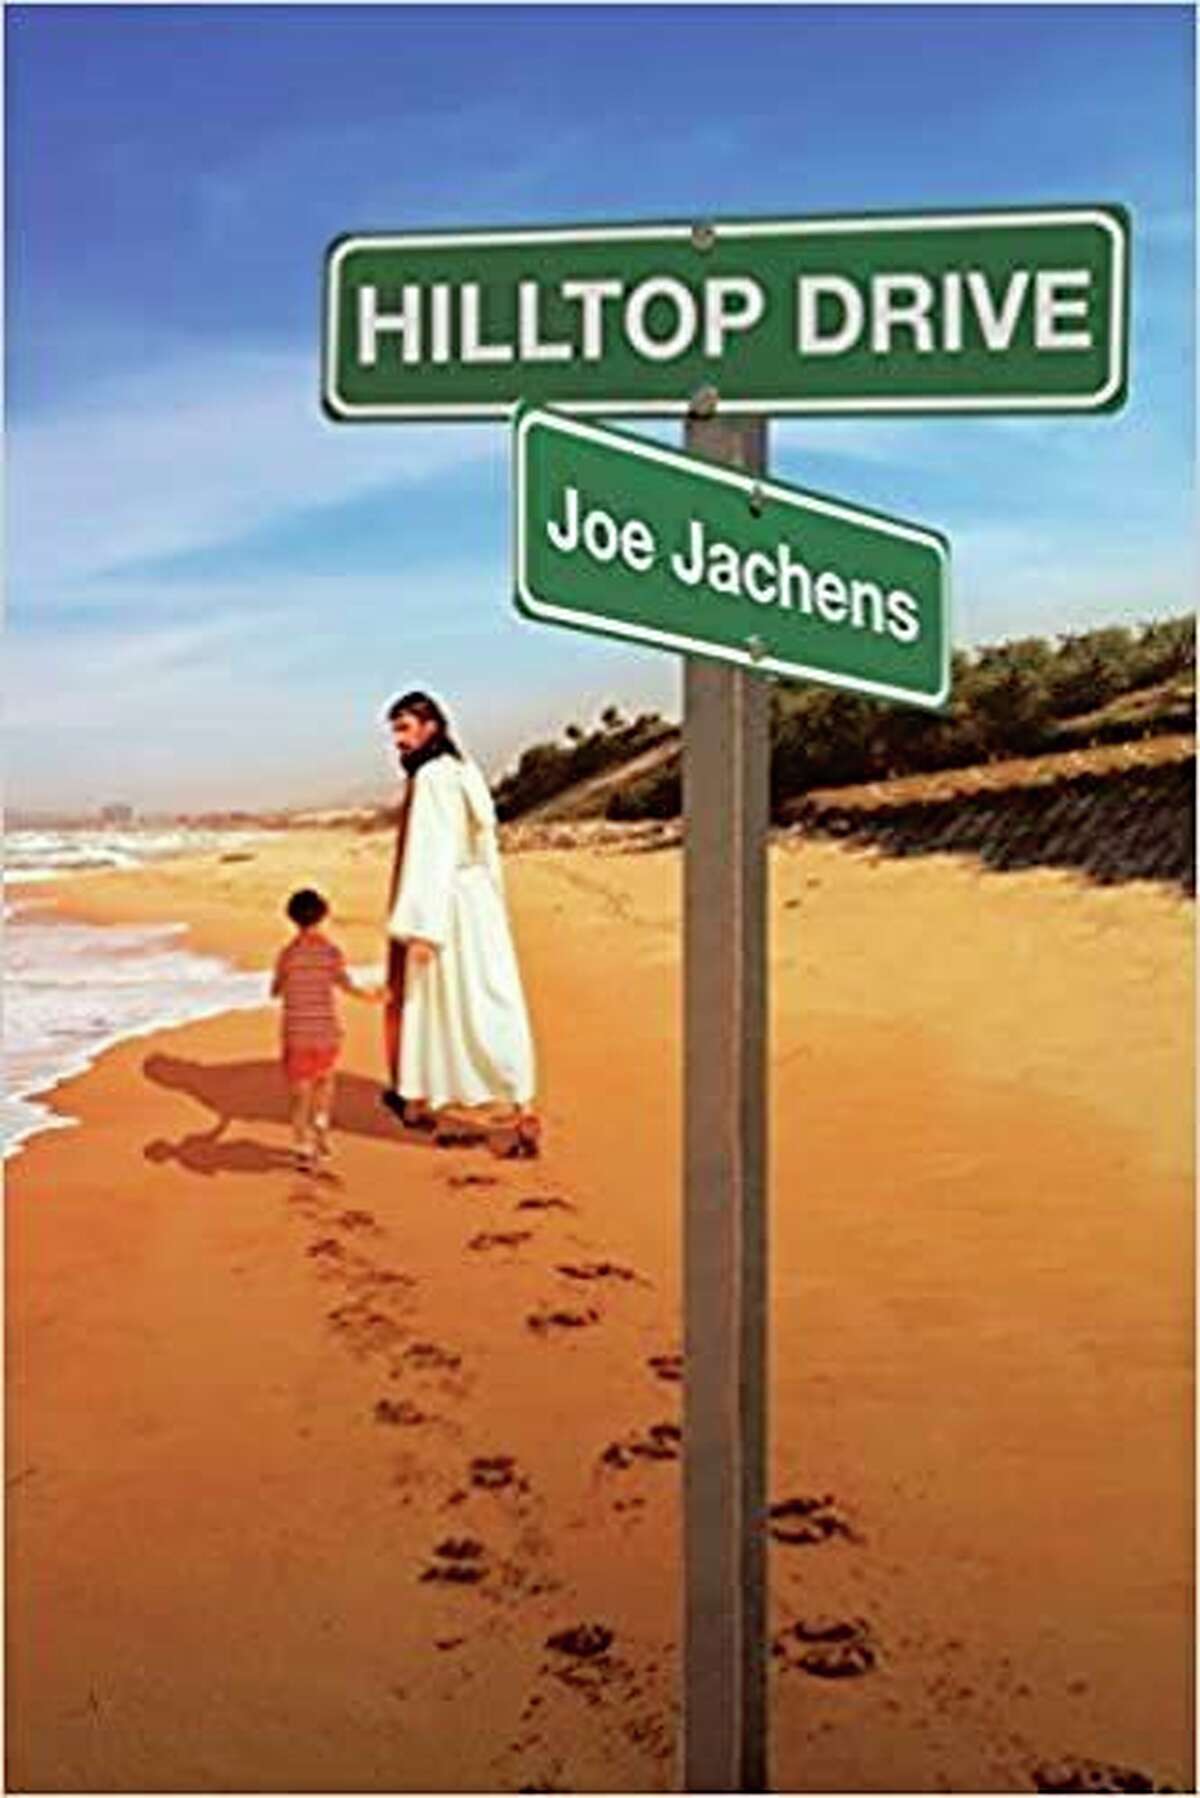 "Hilltop Drive" by Midland's Joe Jachens was released in September. (Photo provided)